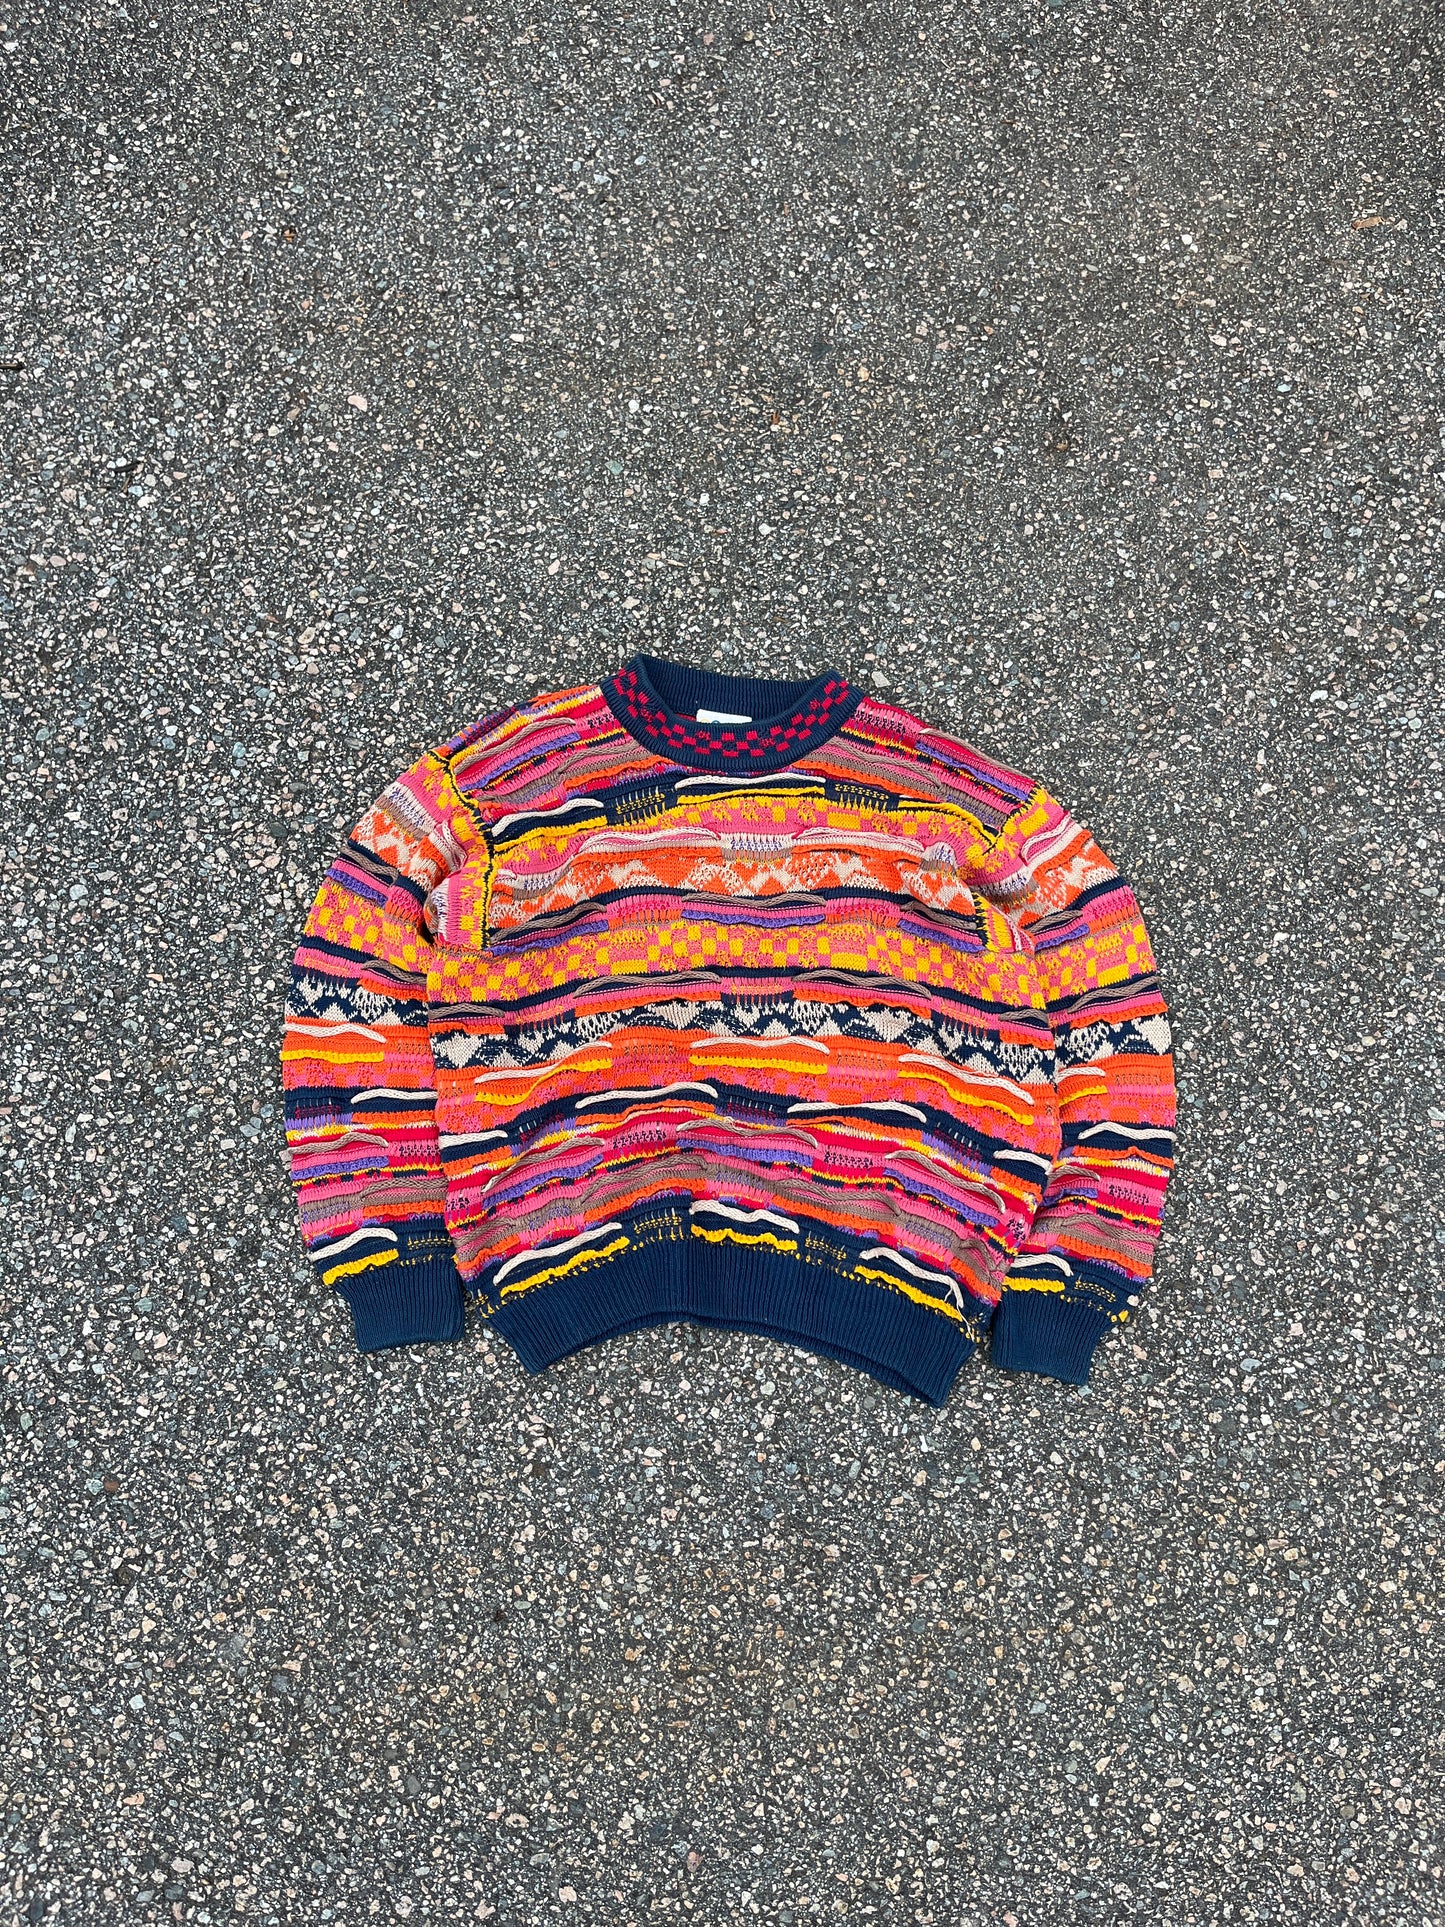 Vintage Coogi 3D Knit Cotton Sweater - Small